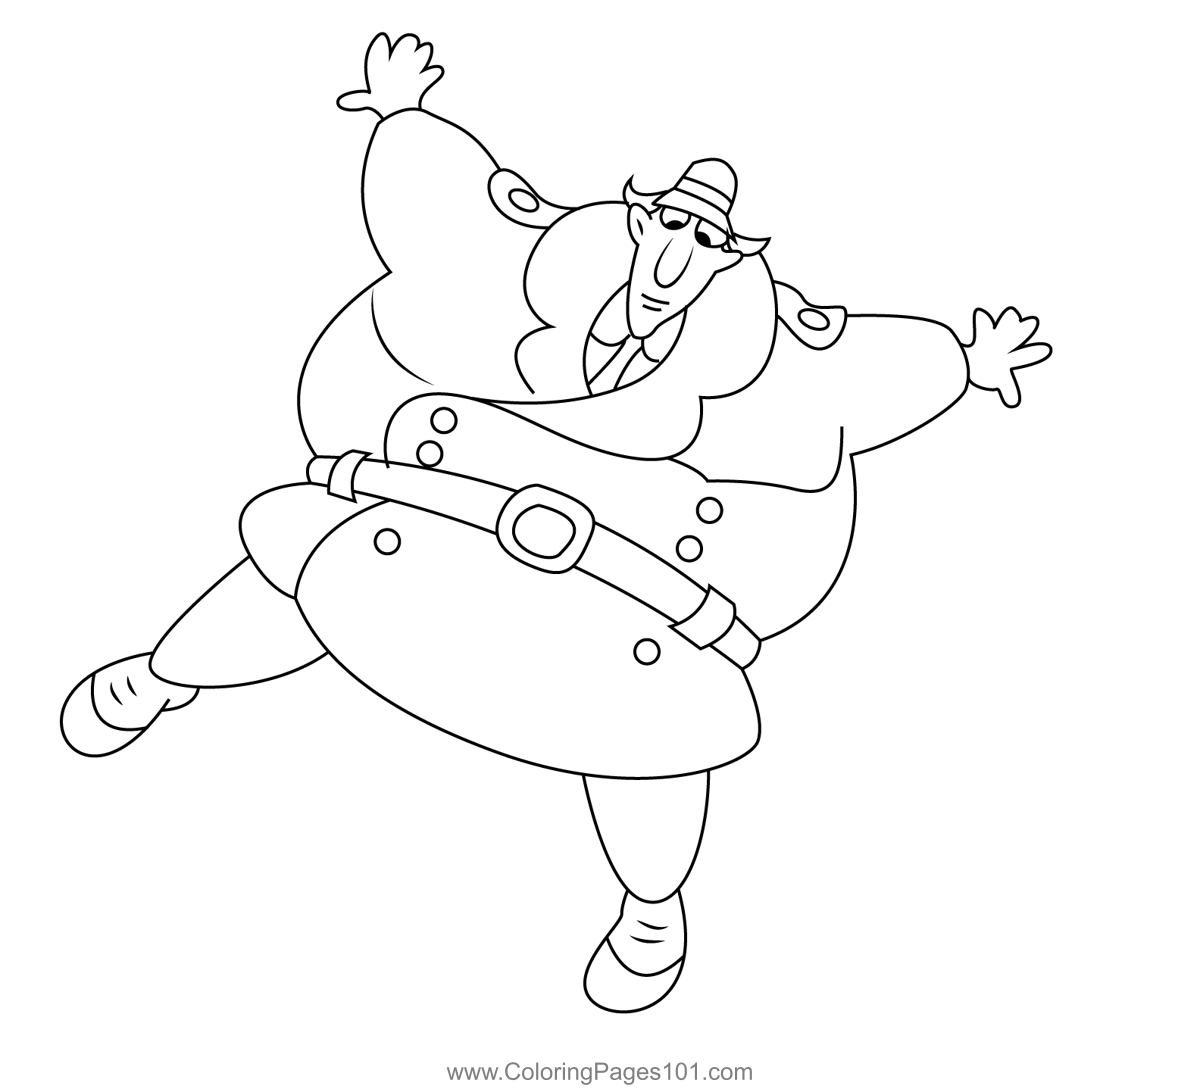 Gadget Coat Coloring Page for Kids - Free Inspector Gadget Printable ...